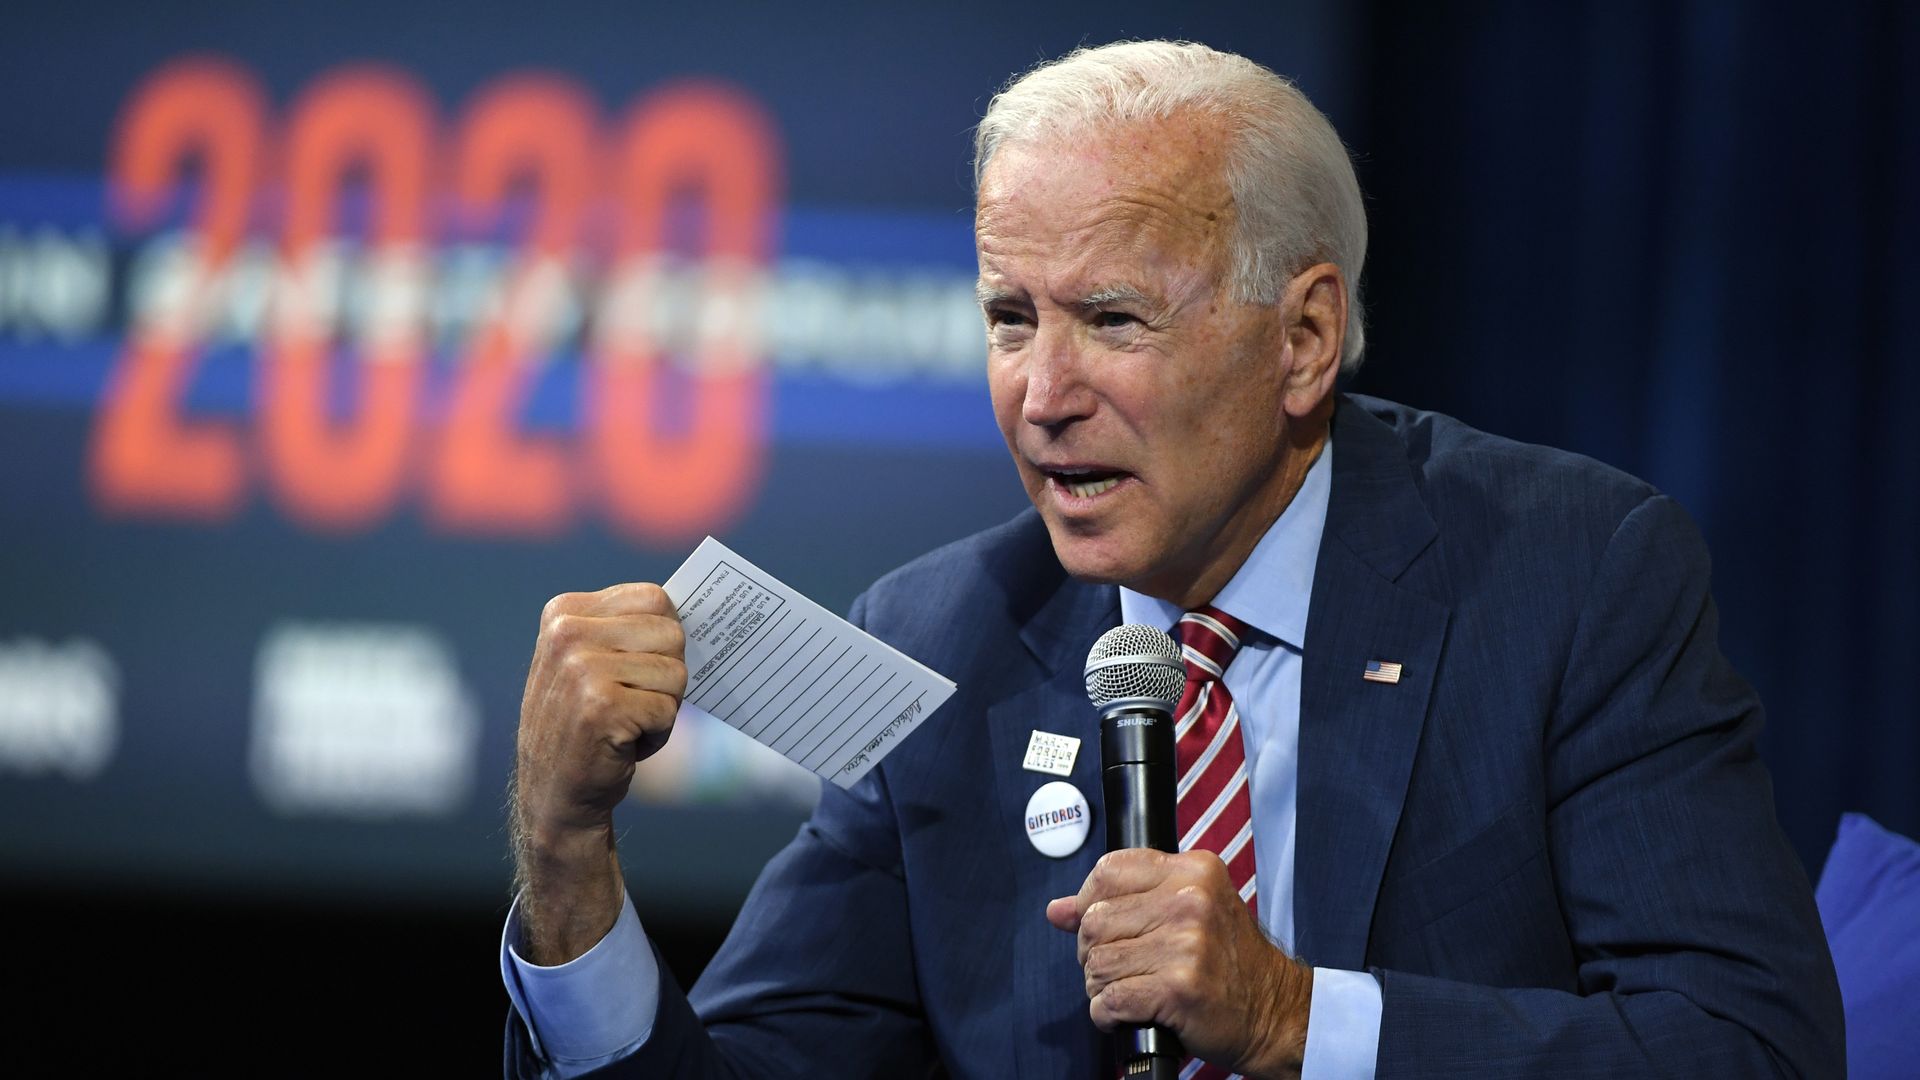 Democratic presidential candidate Joe Biden speaks during the 2020 Gun Safety Forum hosted by gun control activist groups Giffords and March for Our Lives at Enclave on October 2